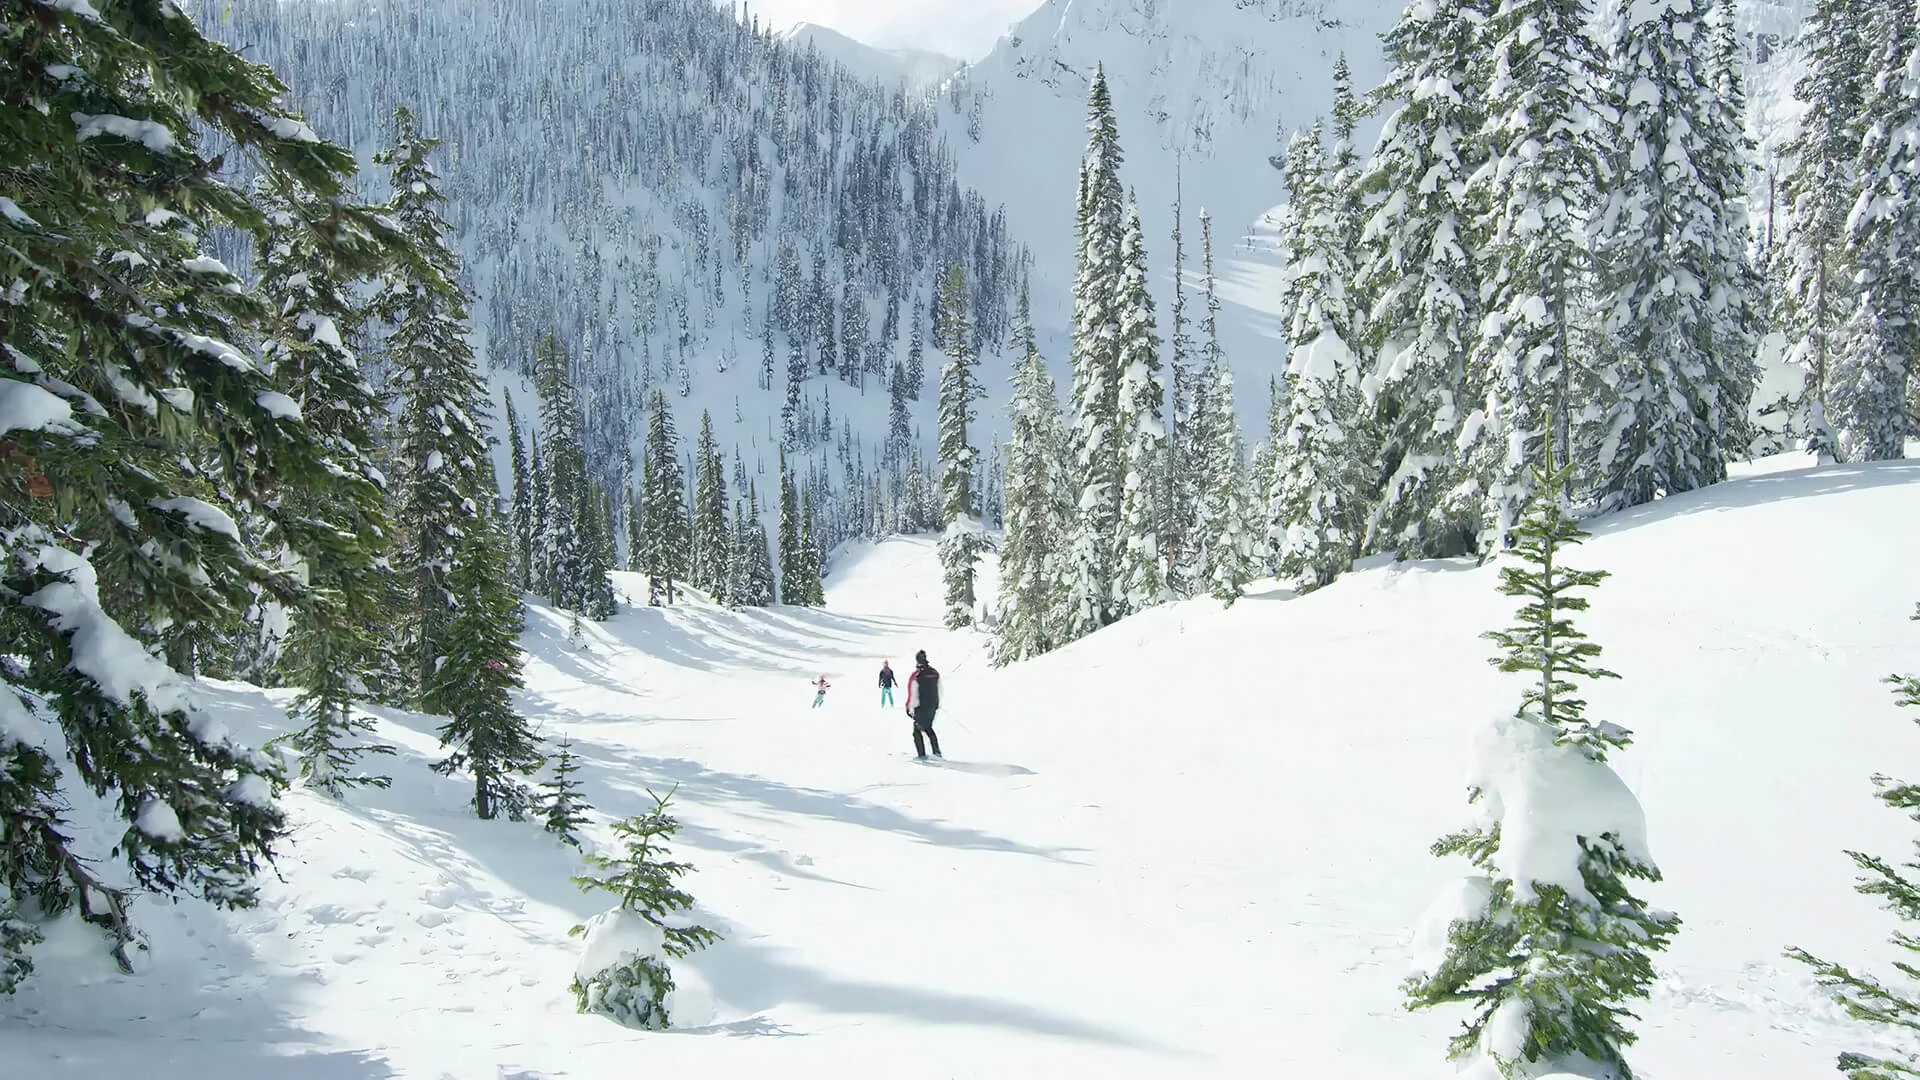 Will B.C.’s famed ‘Powder Highway’ survive in a warming world?